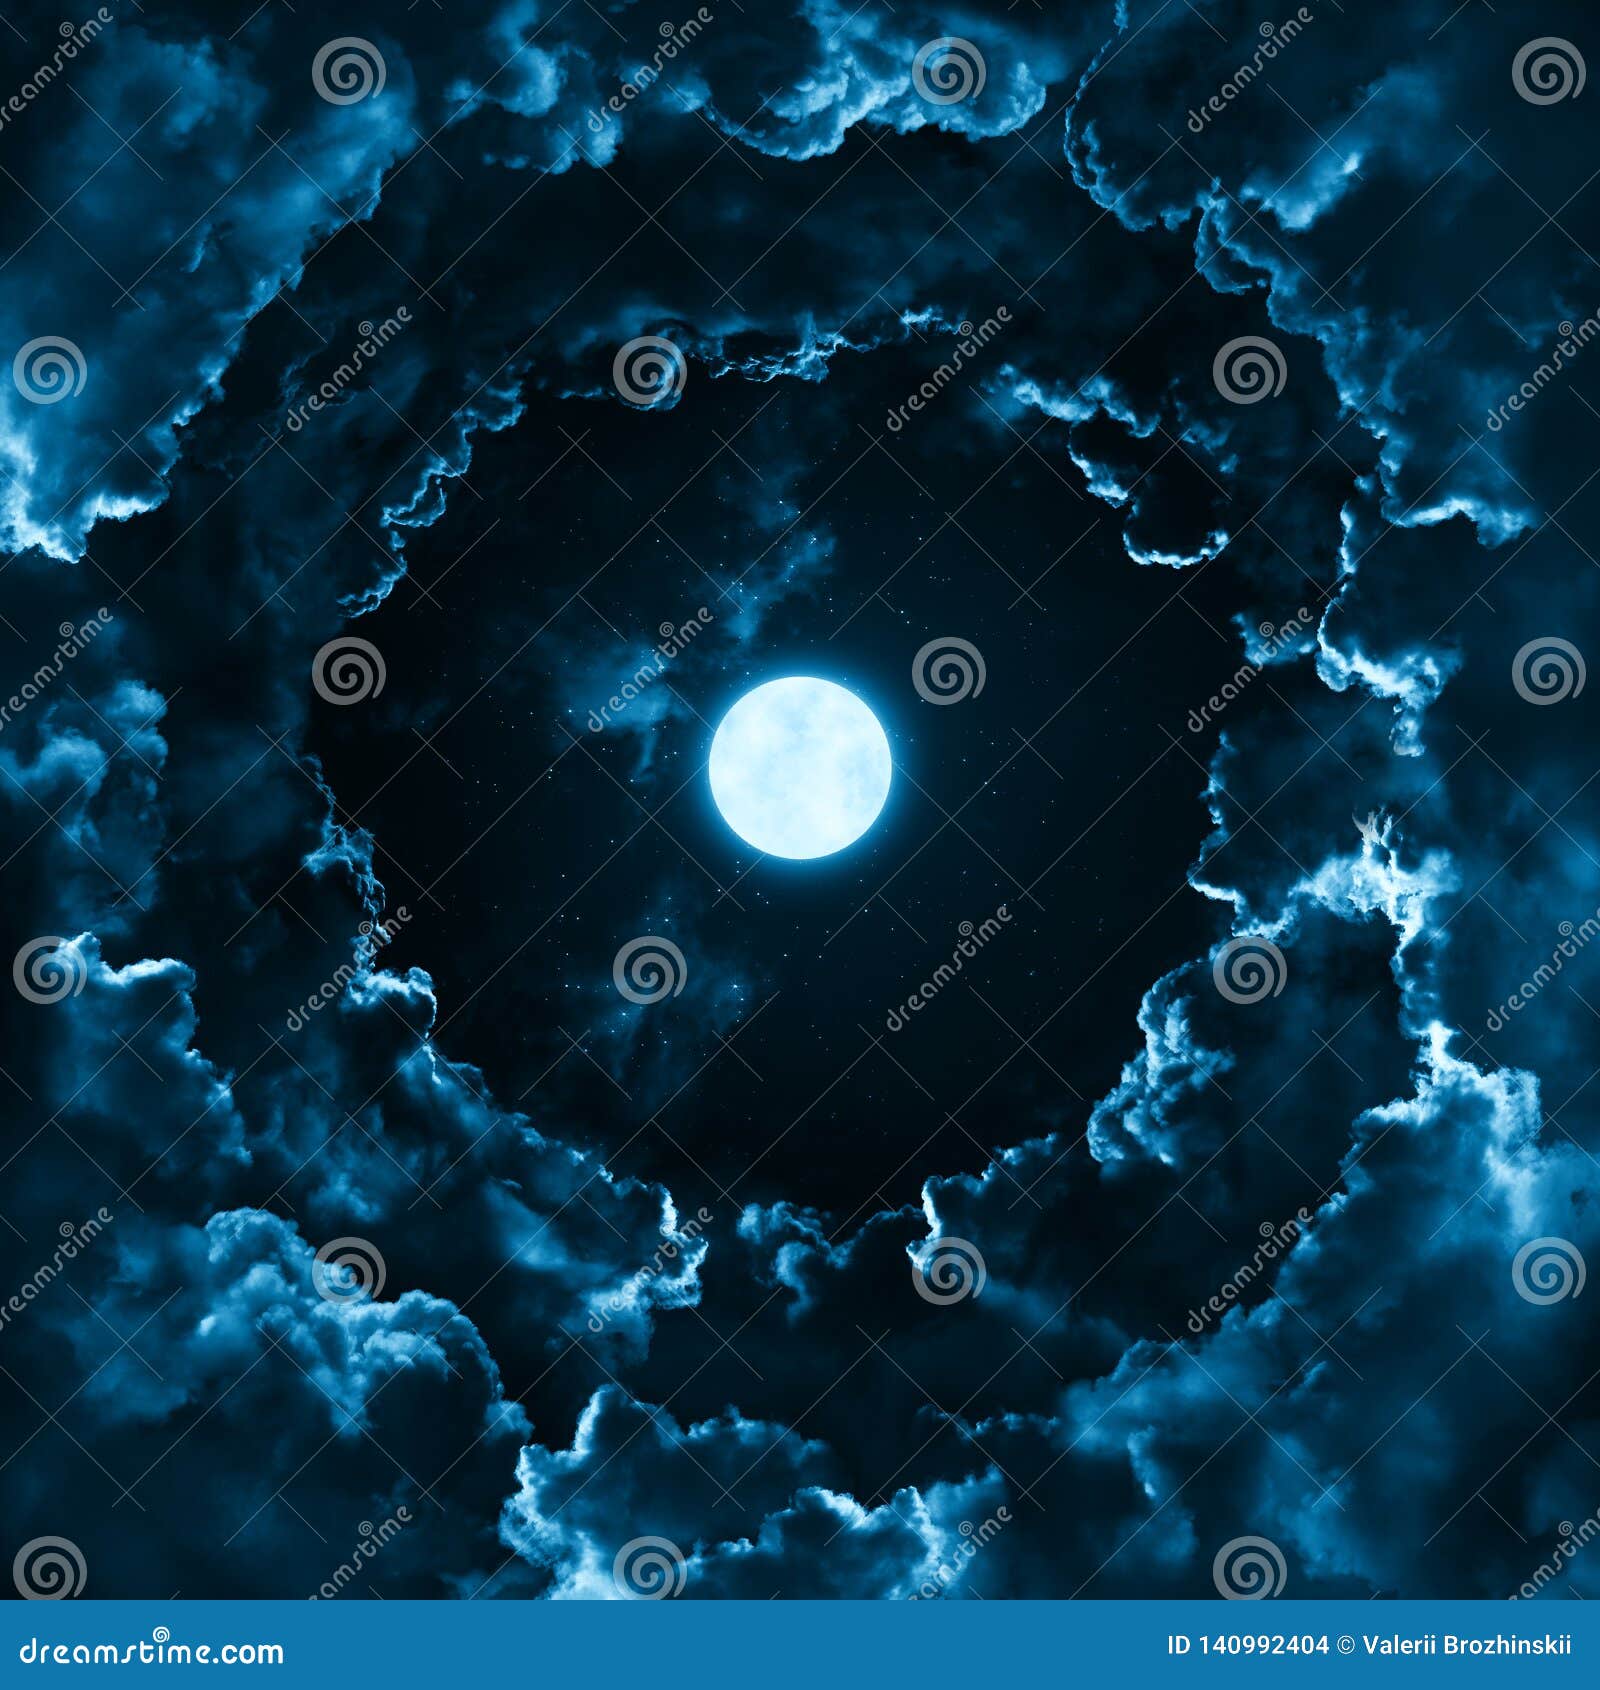 30 4 Dramatic Clouds Night Photos Free Royalty Free Stock Photos From Dreamstime